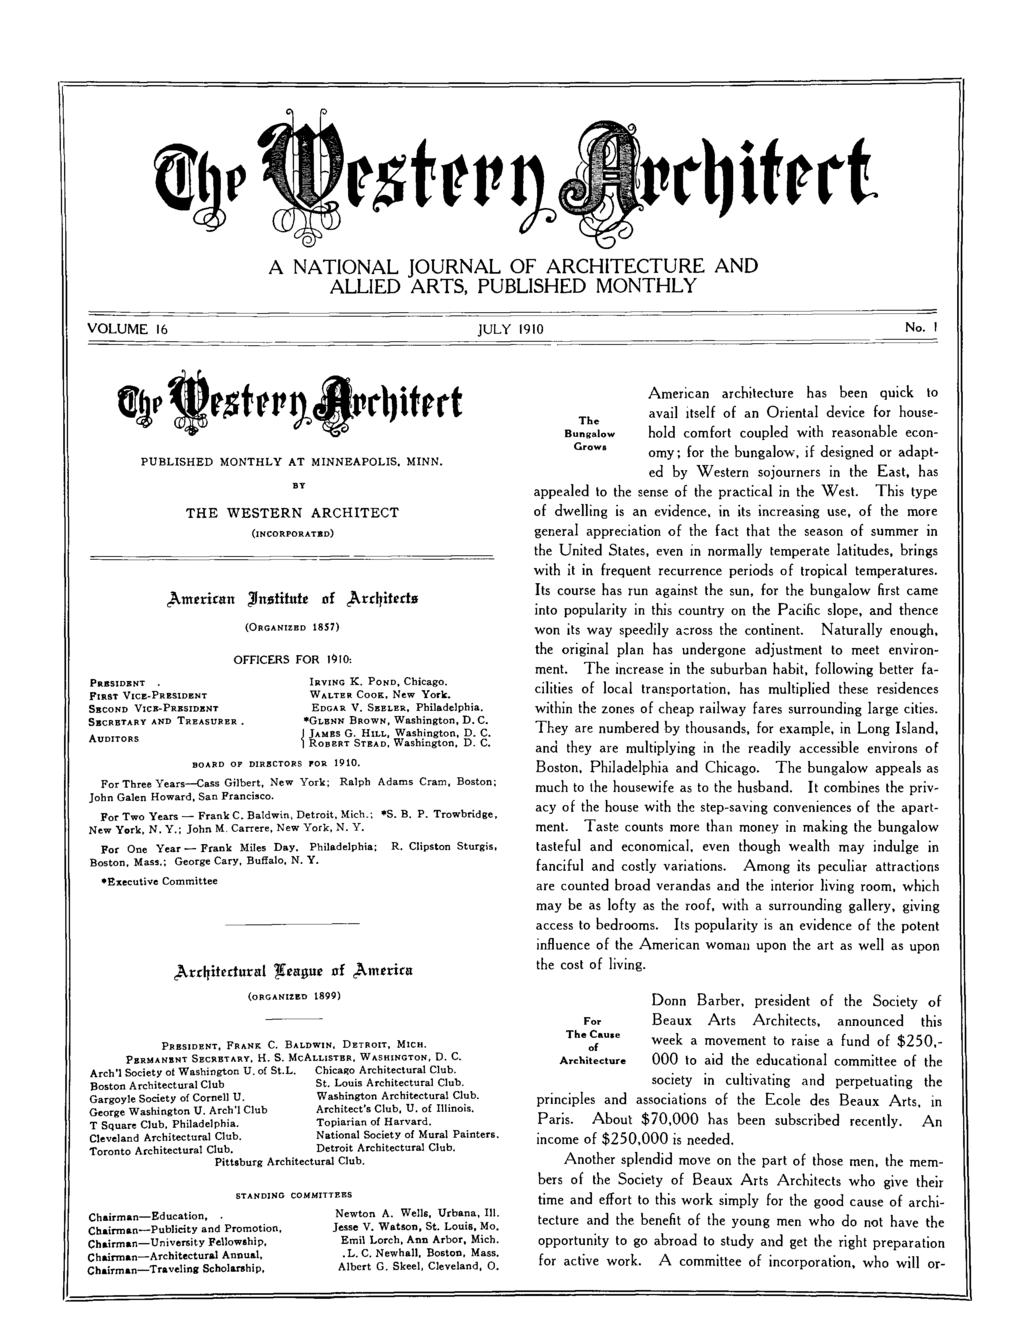 A NATIONAL JOURNAL OF ARCHITECTURE AND ALLIED ARTS, PUBLISHED MONTHLY VOLUME 16 JULY 1910 No. I PRESIDENT FIRST SECOND PUBLISHED MONTHLY AT MINNE